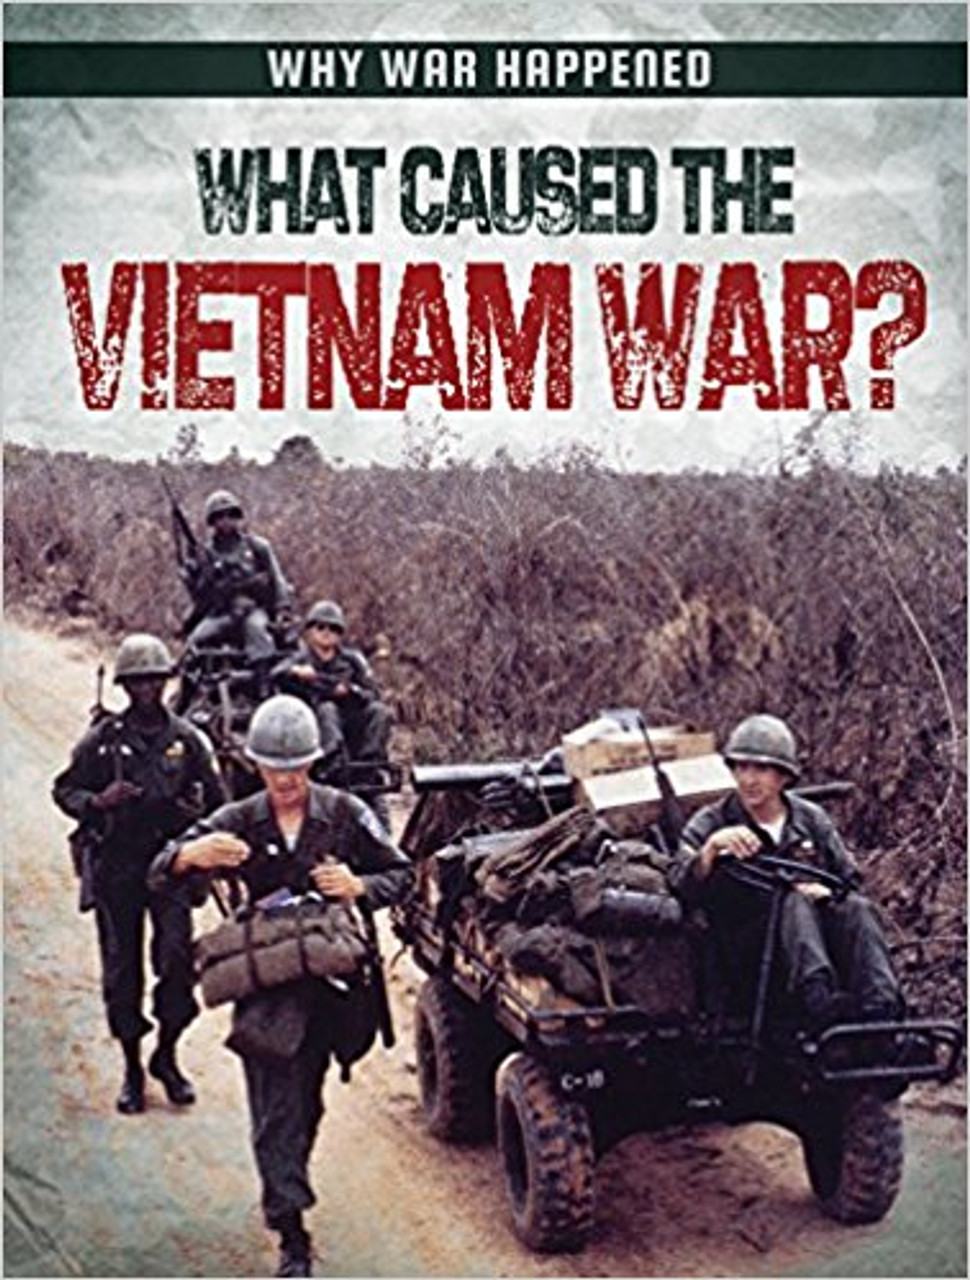 What Caused the Vietnam War? by Sarah Levete